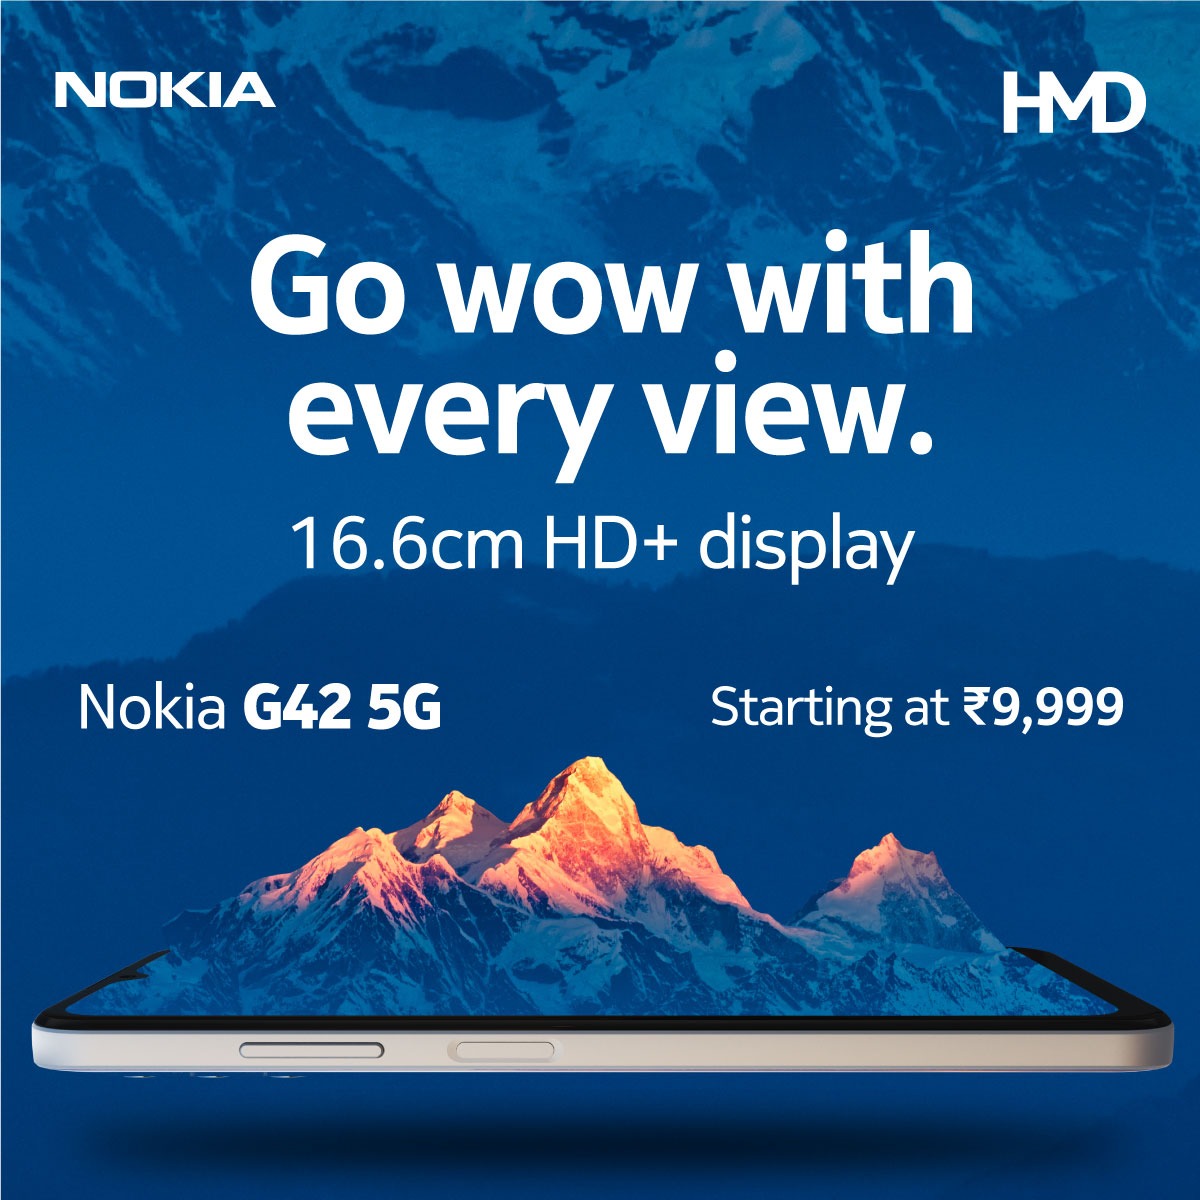 Enjoy a jaw-dropping viewing experience with the incredible 16.6 cm HD+ Display of Nokia G42 5G. Order now from our website hmd.com at a starting price of just ₹9,999. #NokiaG42_5G #MoveFast